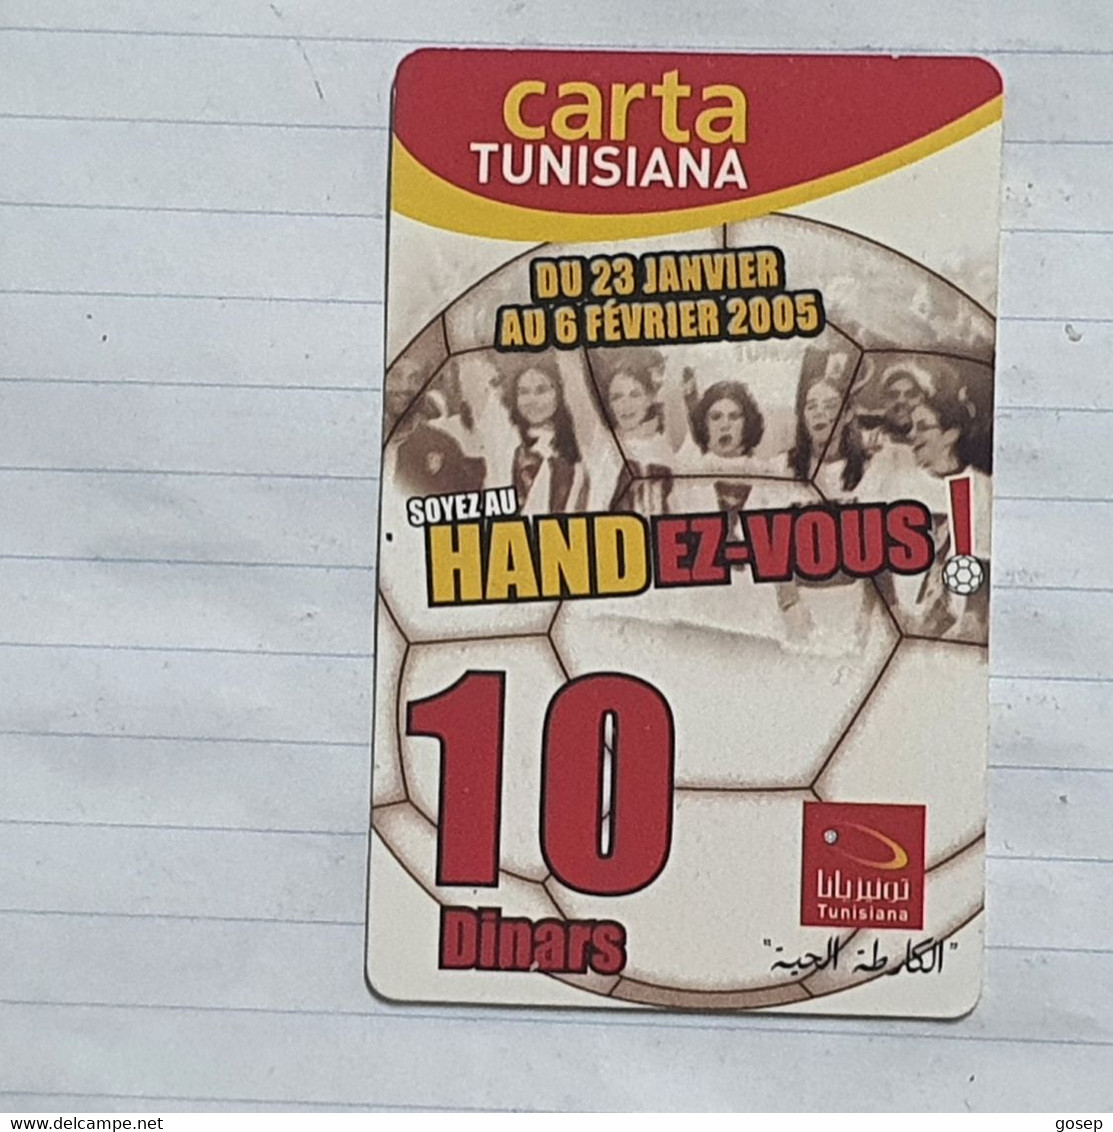 TUNISIA-(TUN-REF-TUN-39)-Soyez Au Hand Ez-vous(169)-(9098-465-5509-324)-(look From Out Side Card Barcode)-used Card - Tunisia